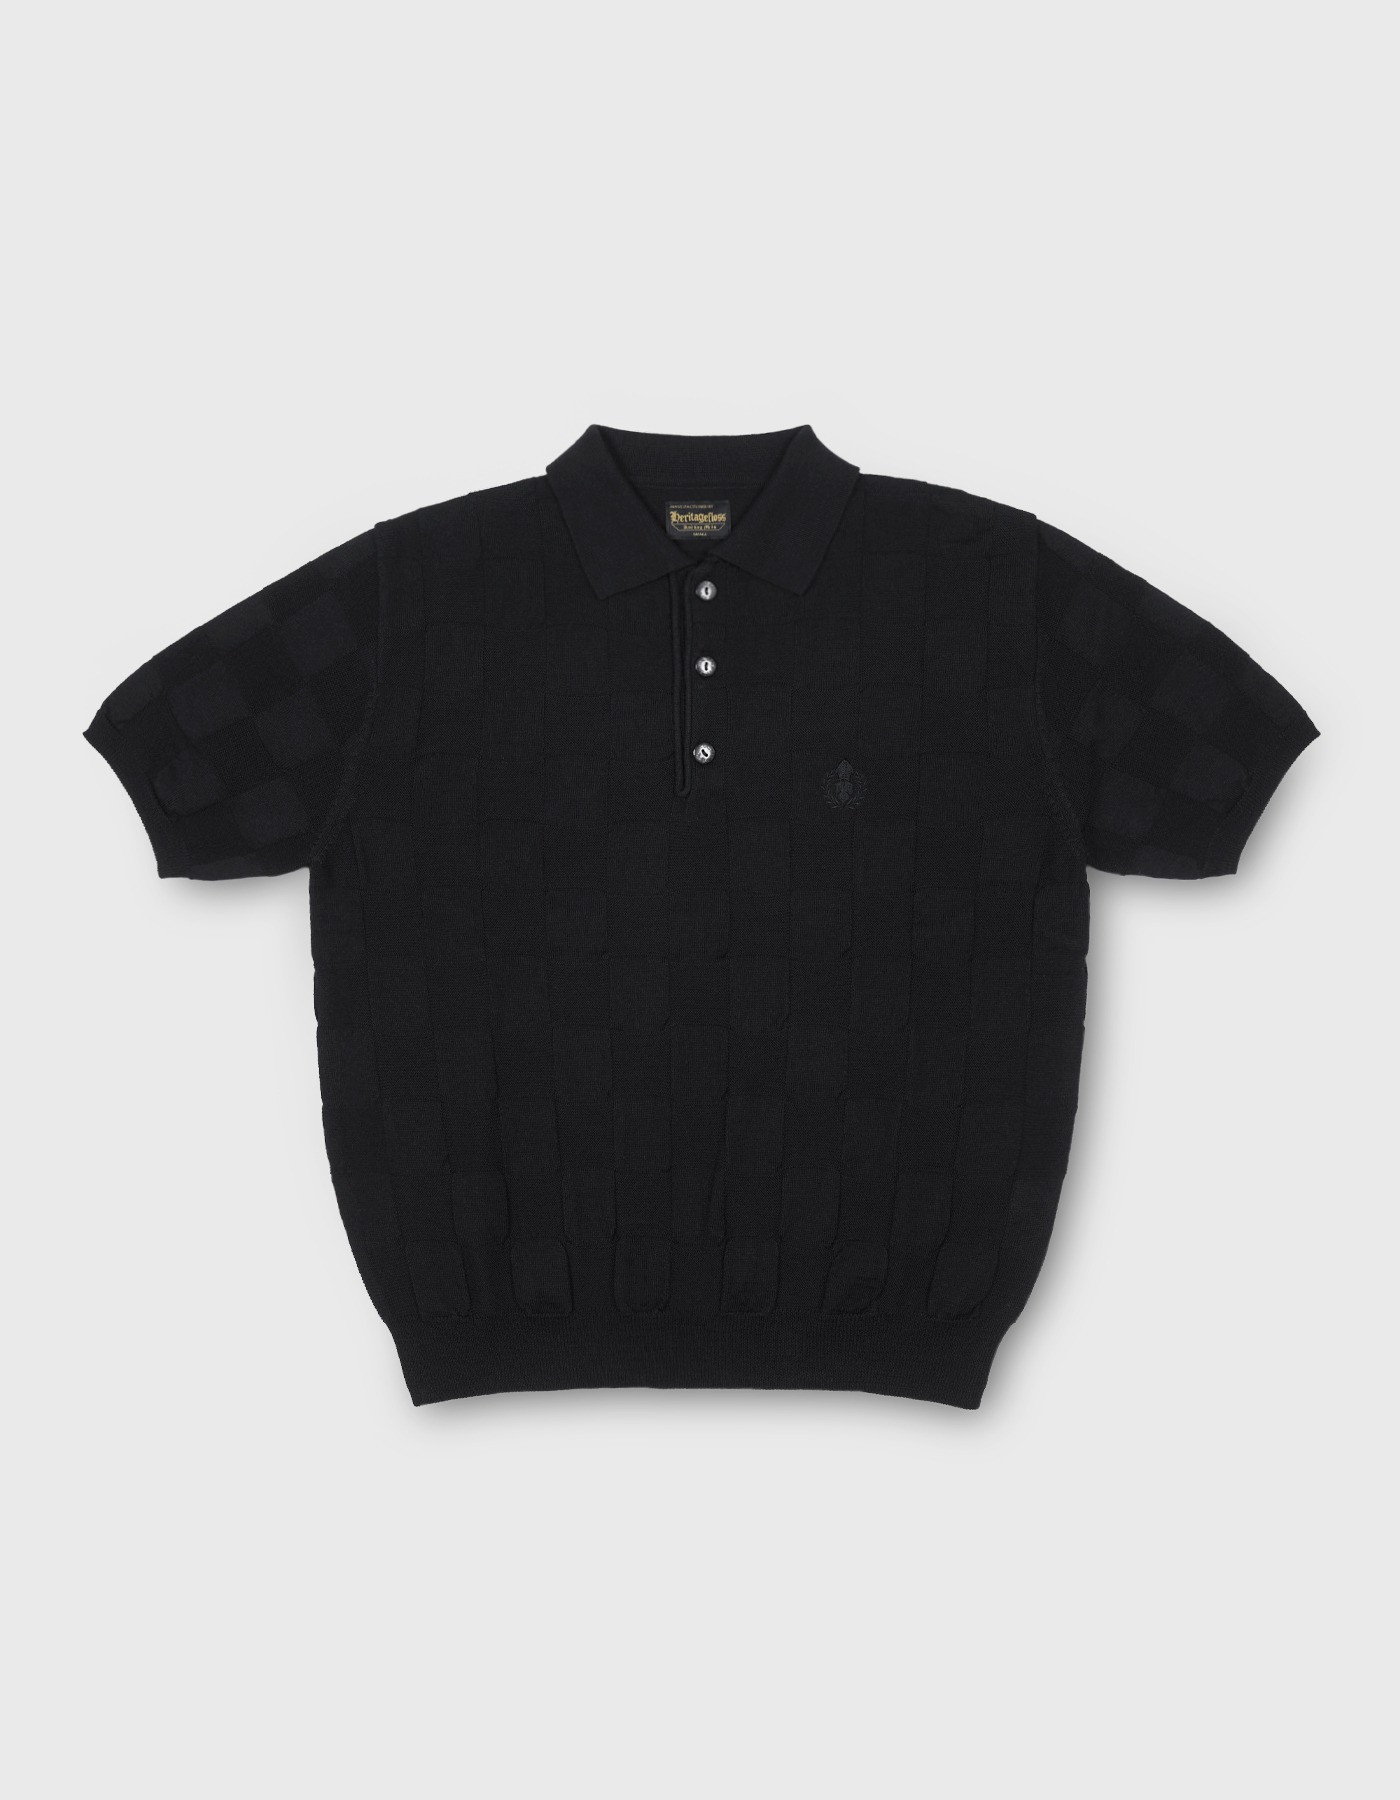 HFC CREST CHECKED POLO SHIRT / Black